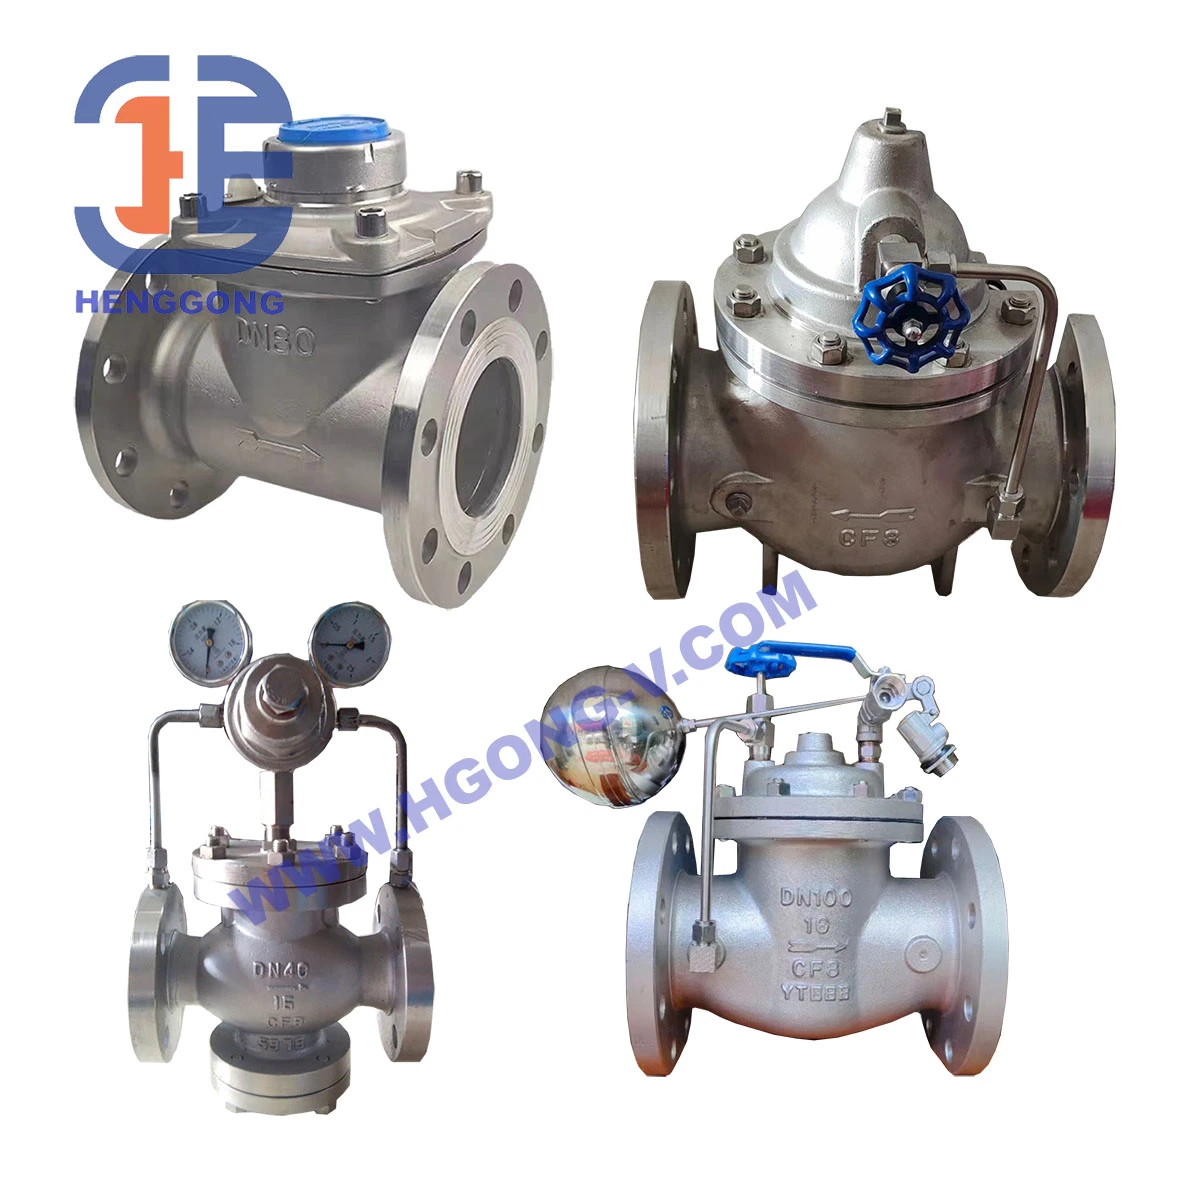 API/DIN Cast Iron Water Treatment Equipment Normally Open Solenoid/Hydraulic/Pneumatic/Water Flow Control Valve